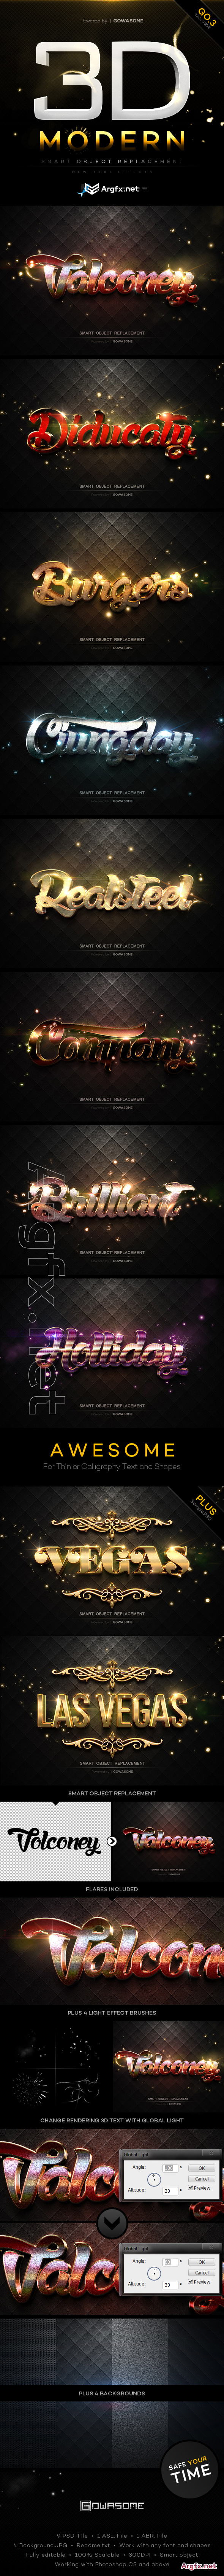  GraphicRiver - Modern 3d Text Effects Go3 10193239